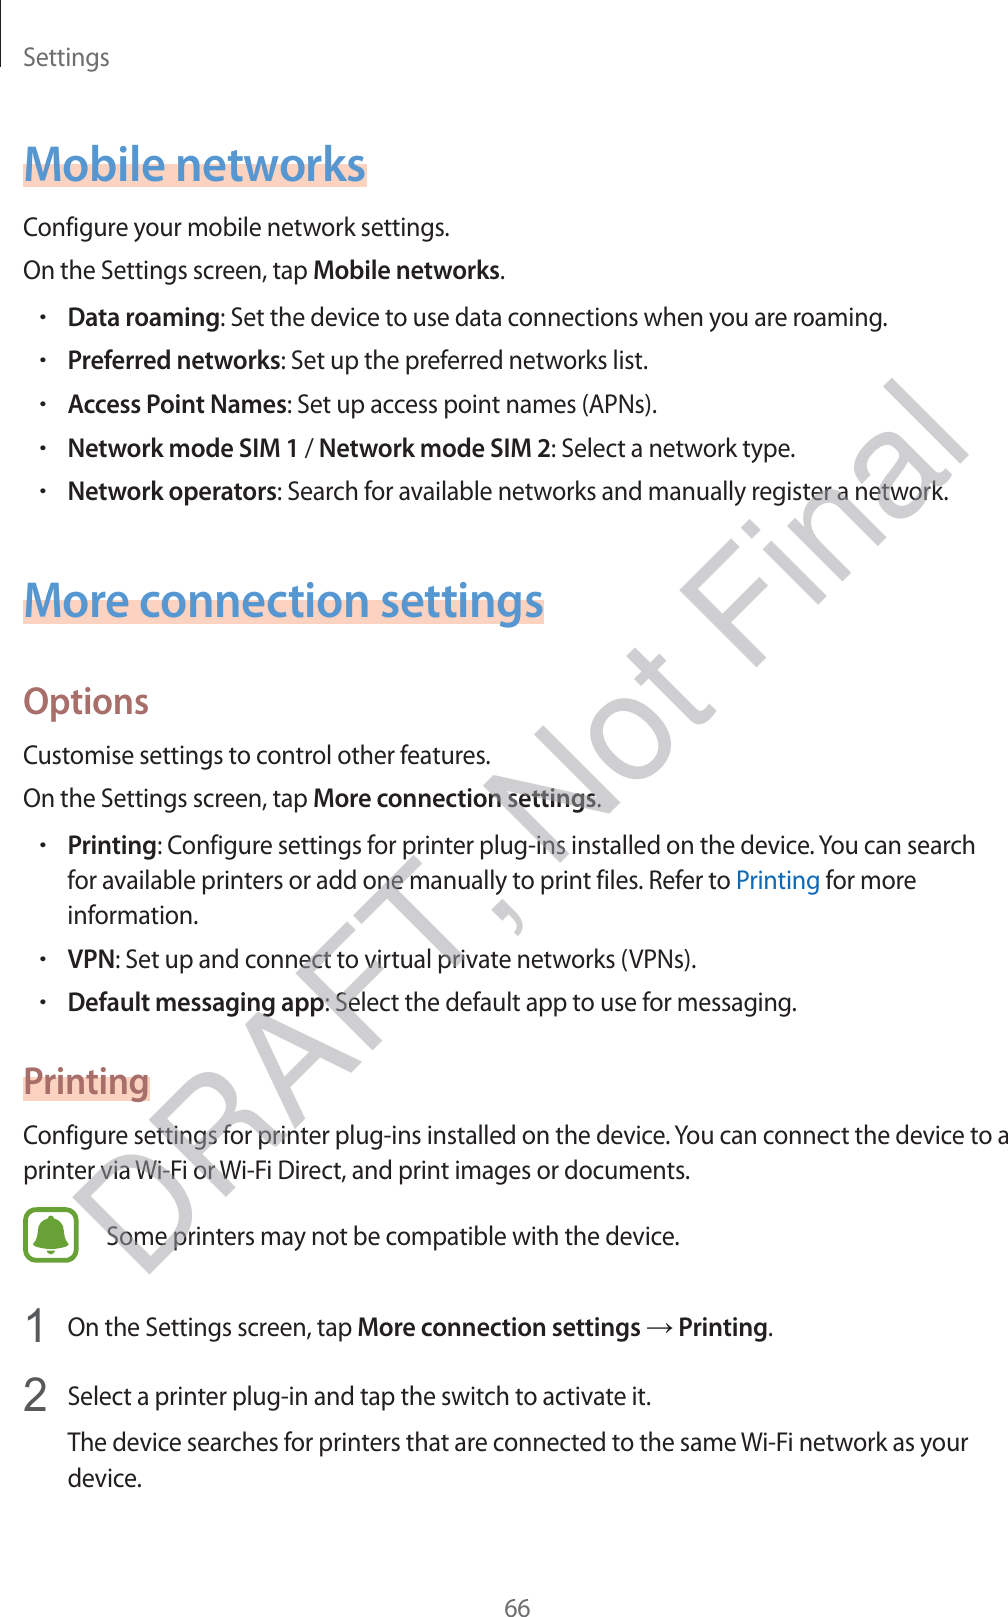 Settings66Mobile networksConfigure your mobile network settings.On the Settings screen, tap Mobile networks.rData roaming: Set the device to use data connections when you are roaming.rPreferred networks: Set up the preferred networks list.rAccess Point Names: Set up access point names (APNs).rNetwork mode SIM 1 / Network mode SIM 2: Select a network type.rNetwork operators: Search for available networks and manually register a network.More connection settingsOptionsCustomise settings to control other features.On the Settings screen, tap More connection settings.rPrinting: Configure settings for printer plug-ins installed on the device. You can search for available printers or add one manually to print files. Refer to Printing for more information.rVPN: Set up and connect to virtual private networks (VPNs).rDefault messaging app: Select the default app to use for messaging.PrintingConfigure settings for printer plug-ins installed on the device. You can connect the device to a printer via Wi-Fi or Wi-Fi Direct, and print images or documents.Some printers may not be compatible with the device.1 On the Settings screen, tap More connection settings → Printing.2 Select a printer plug-in and tap the switch to activate it.The device searches for printers that are connected to the same Wi-Fi network as your device.DRAFT, Not Final